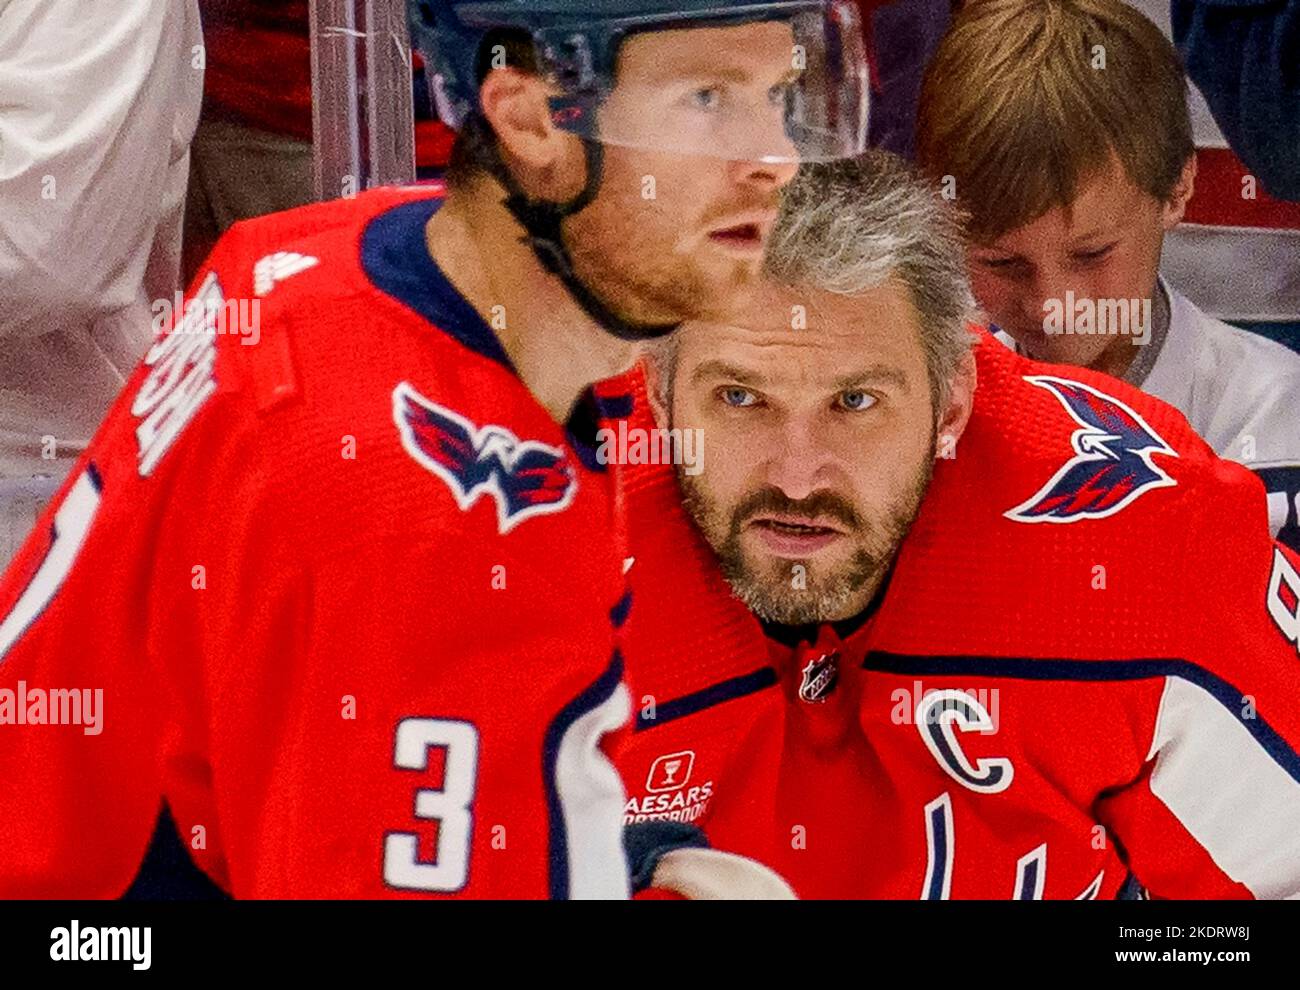 Russian ice hockey star AlexAlex Ovechkin skates before a game Stock Photo